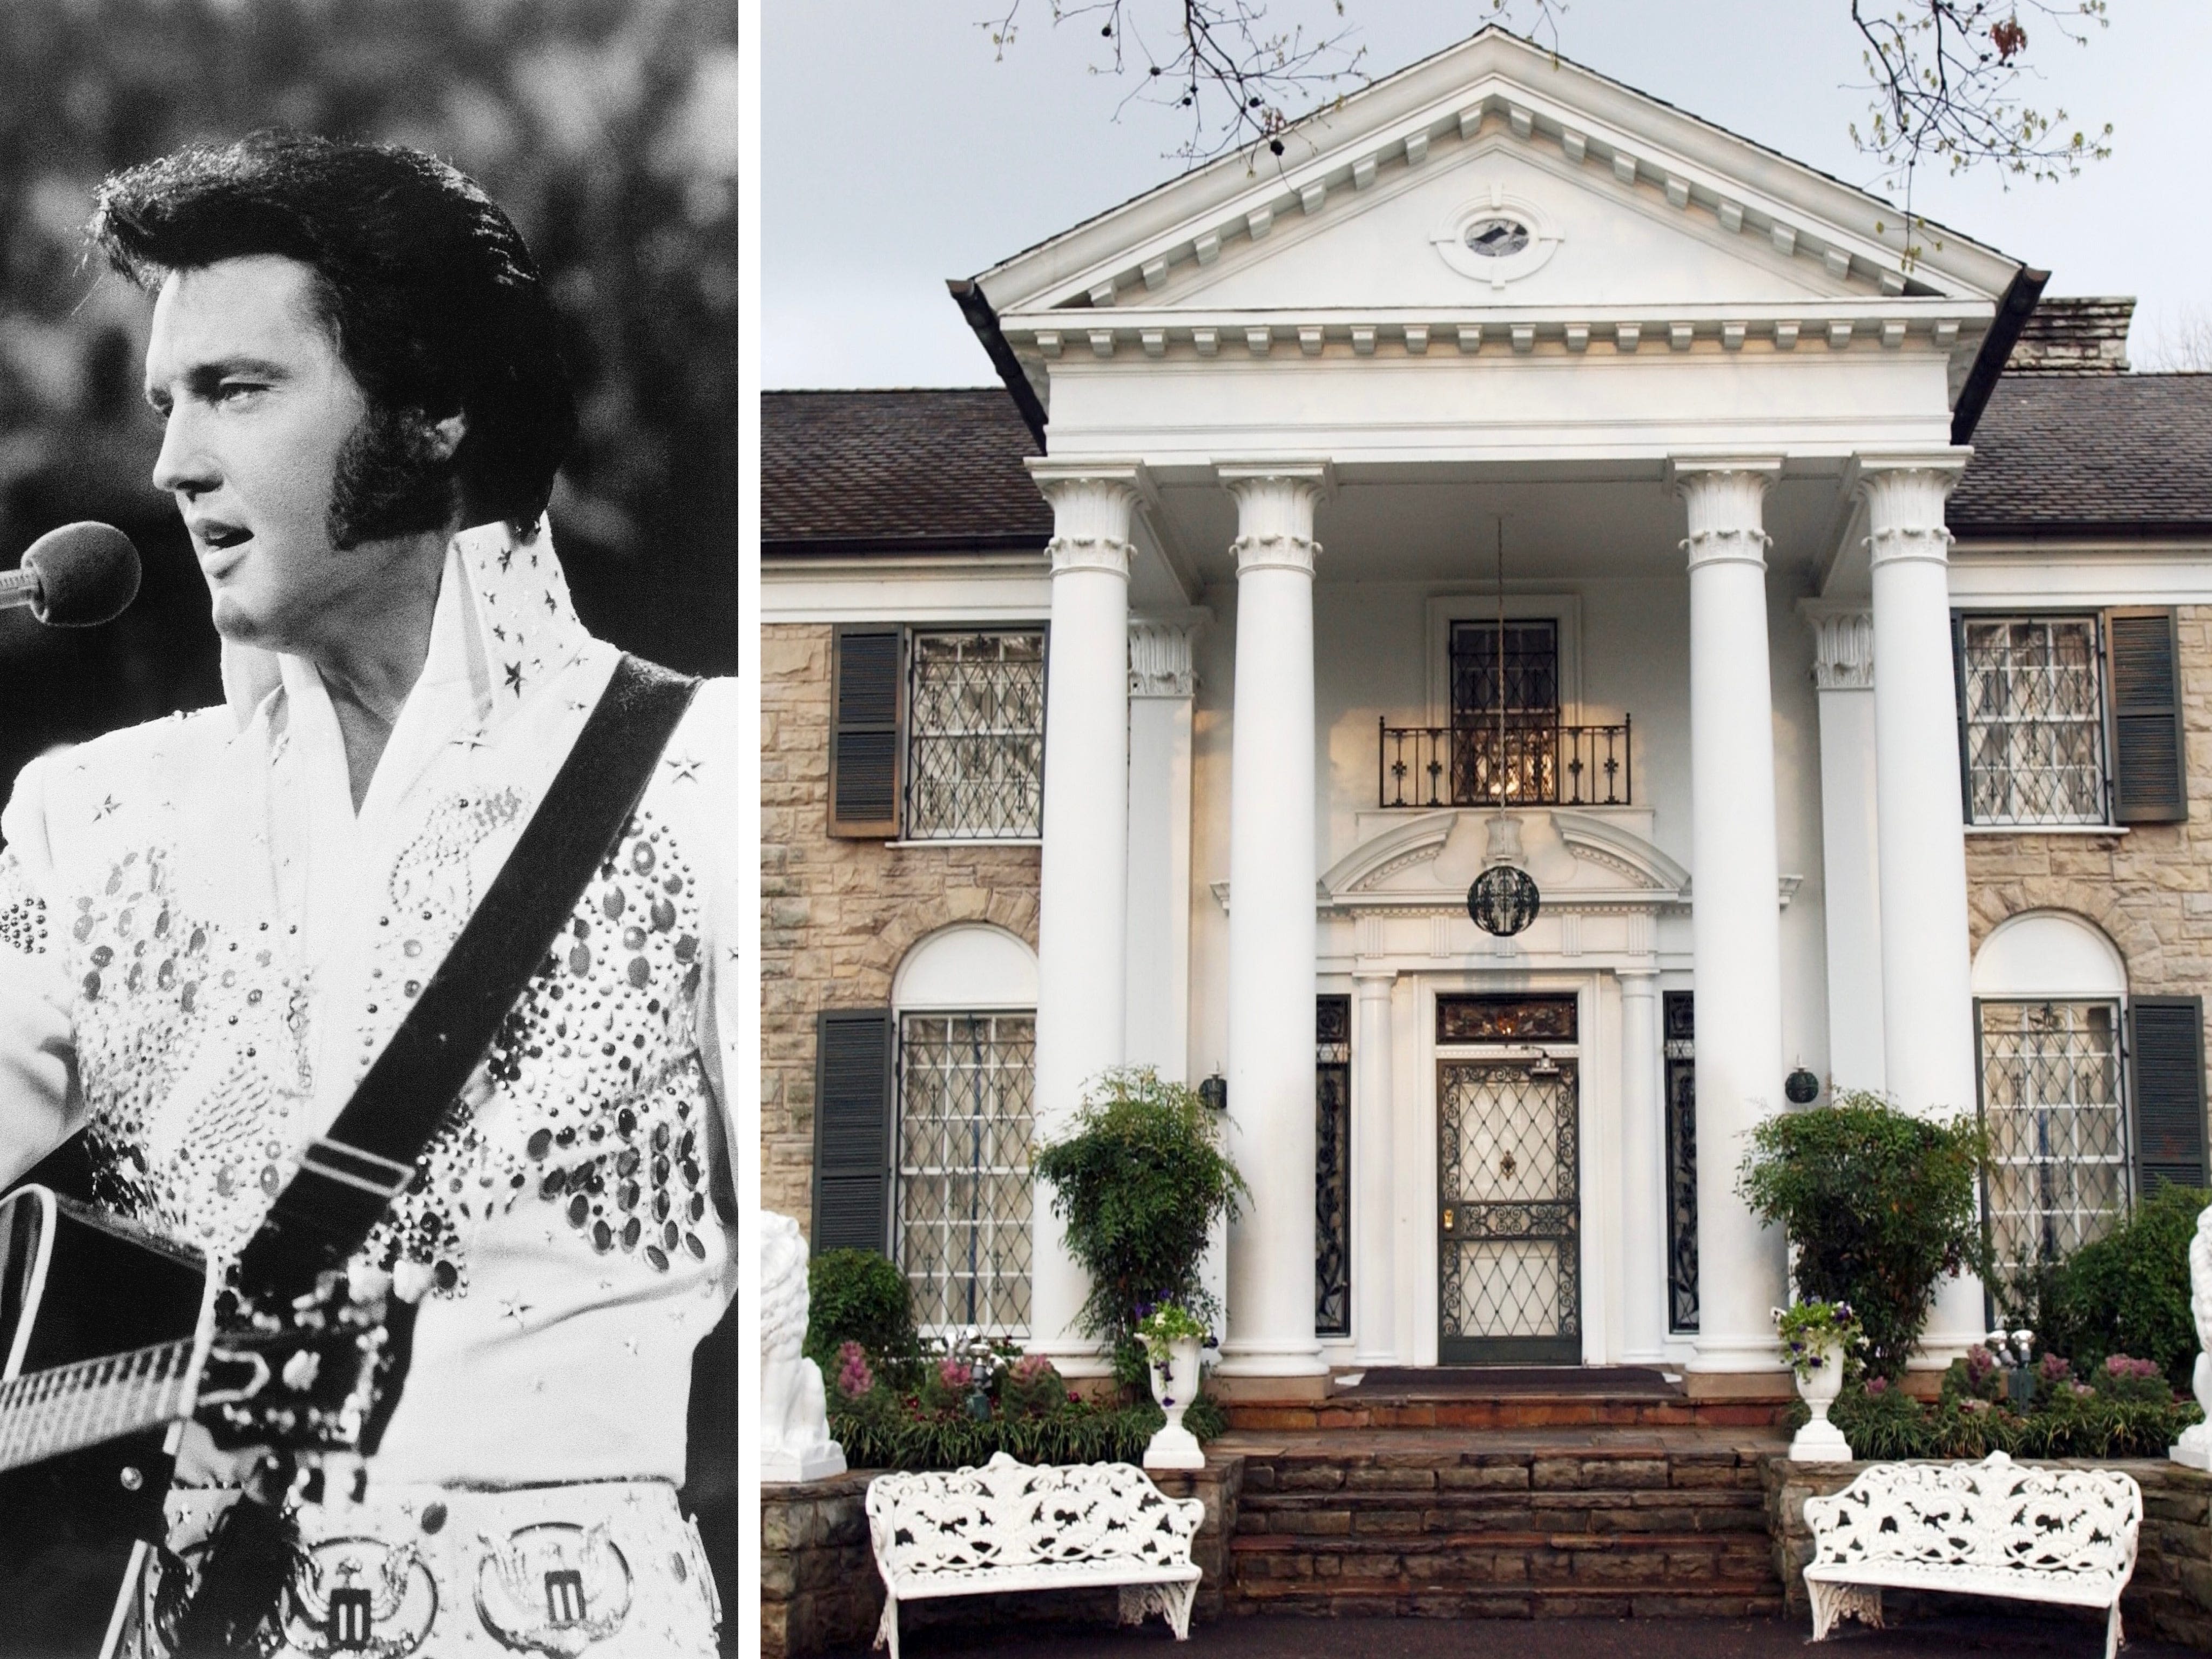 Take a look inside Graceland, the Memphis mansion that Elvis Presley called home. His granddaughter is fighting a forced sale.